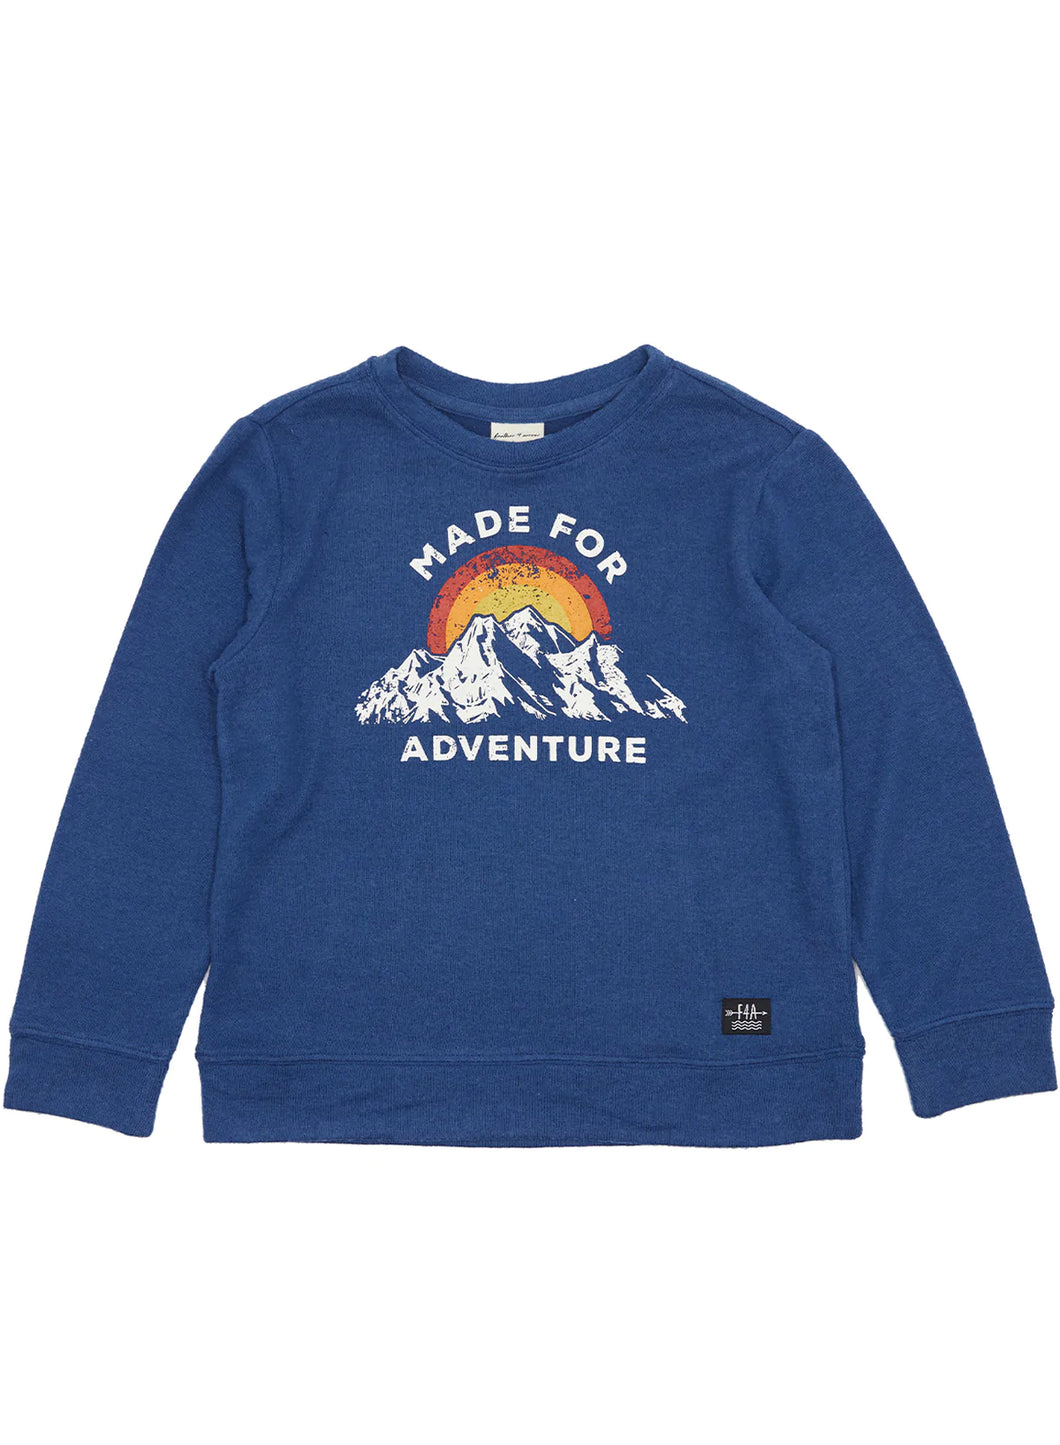 Made for Adventure Pullover